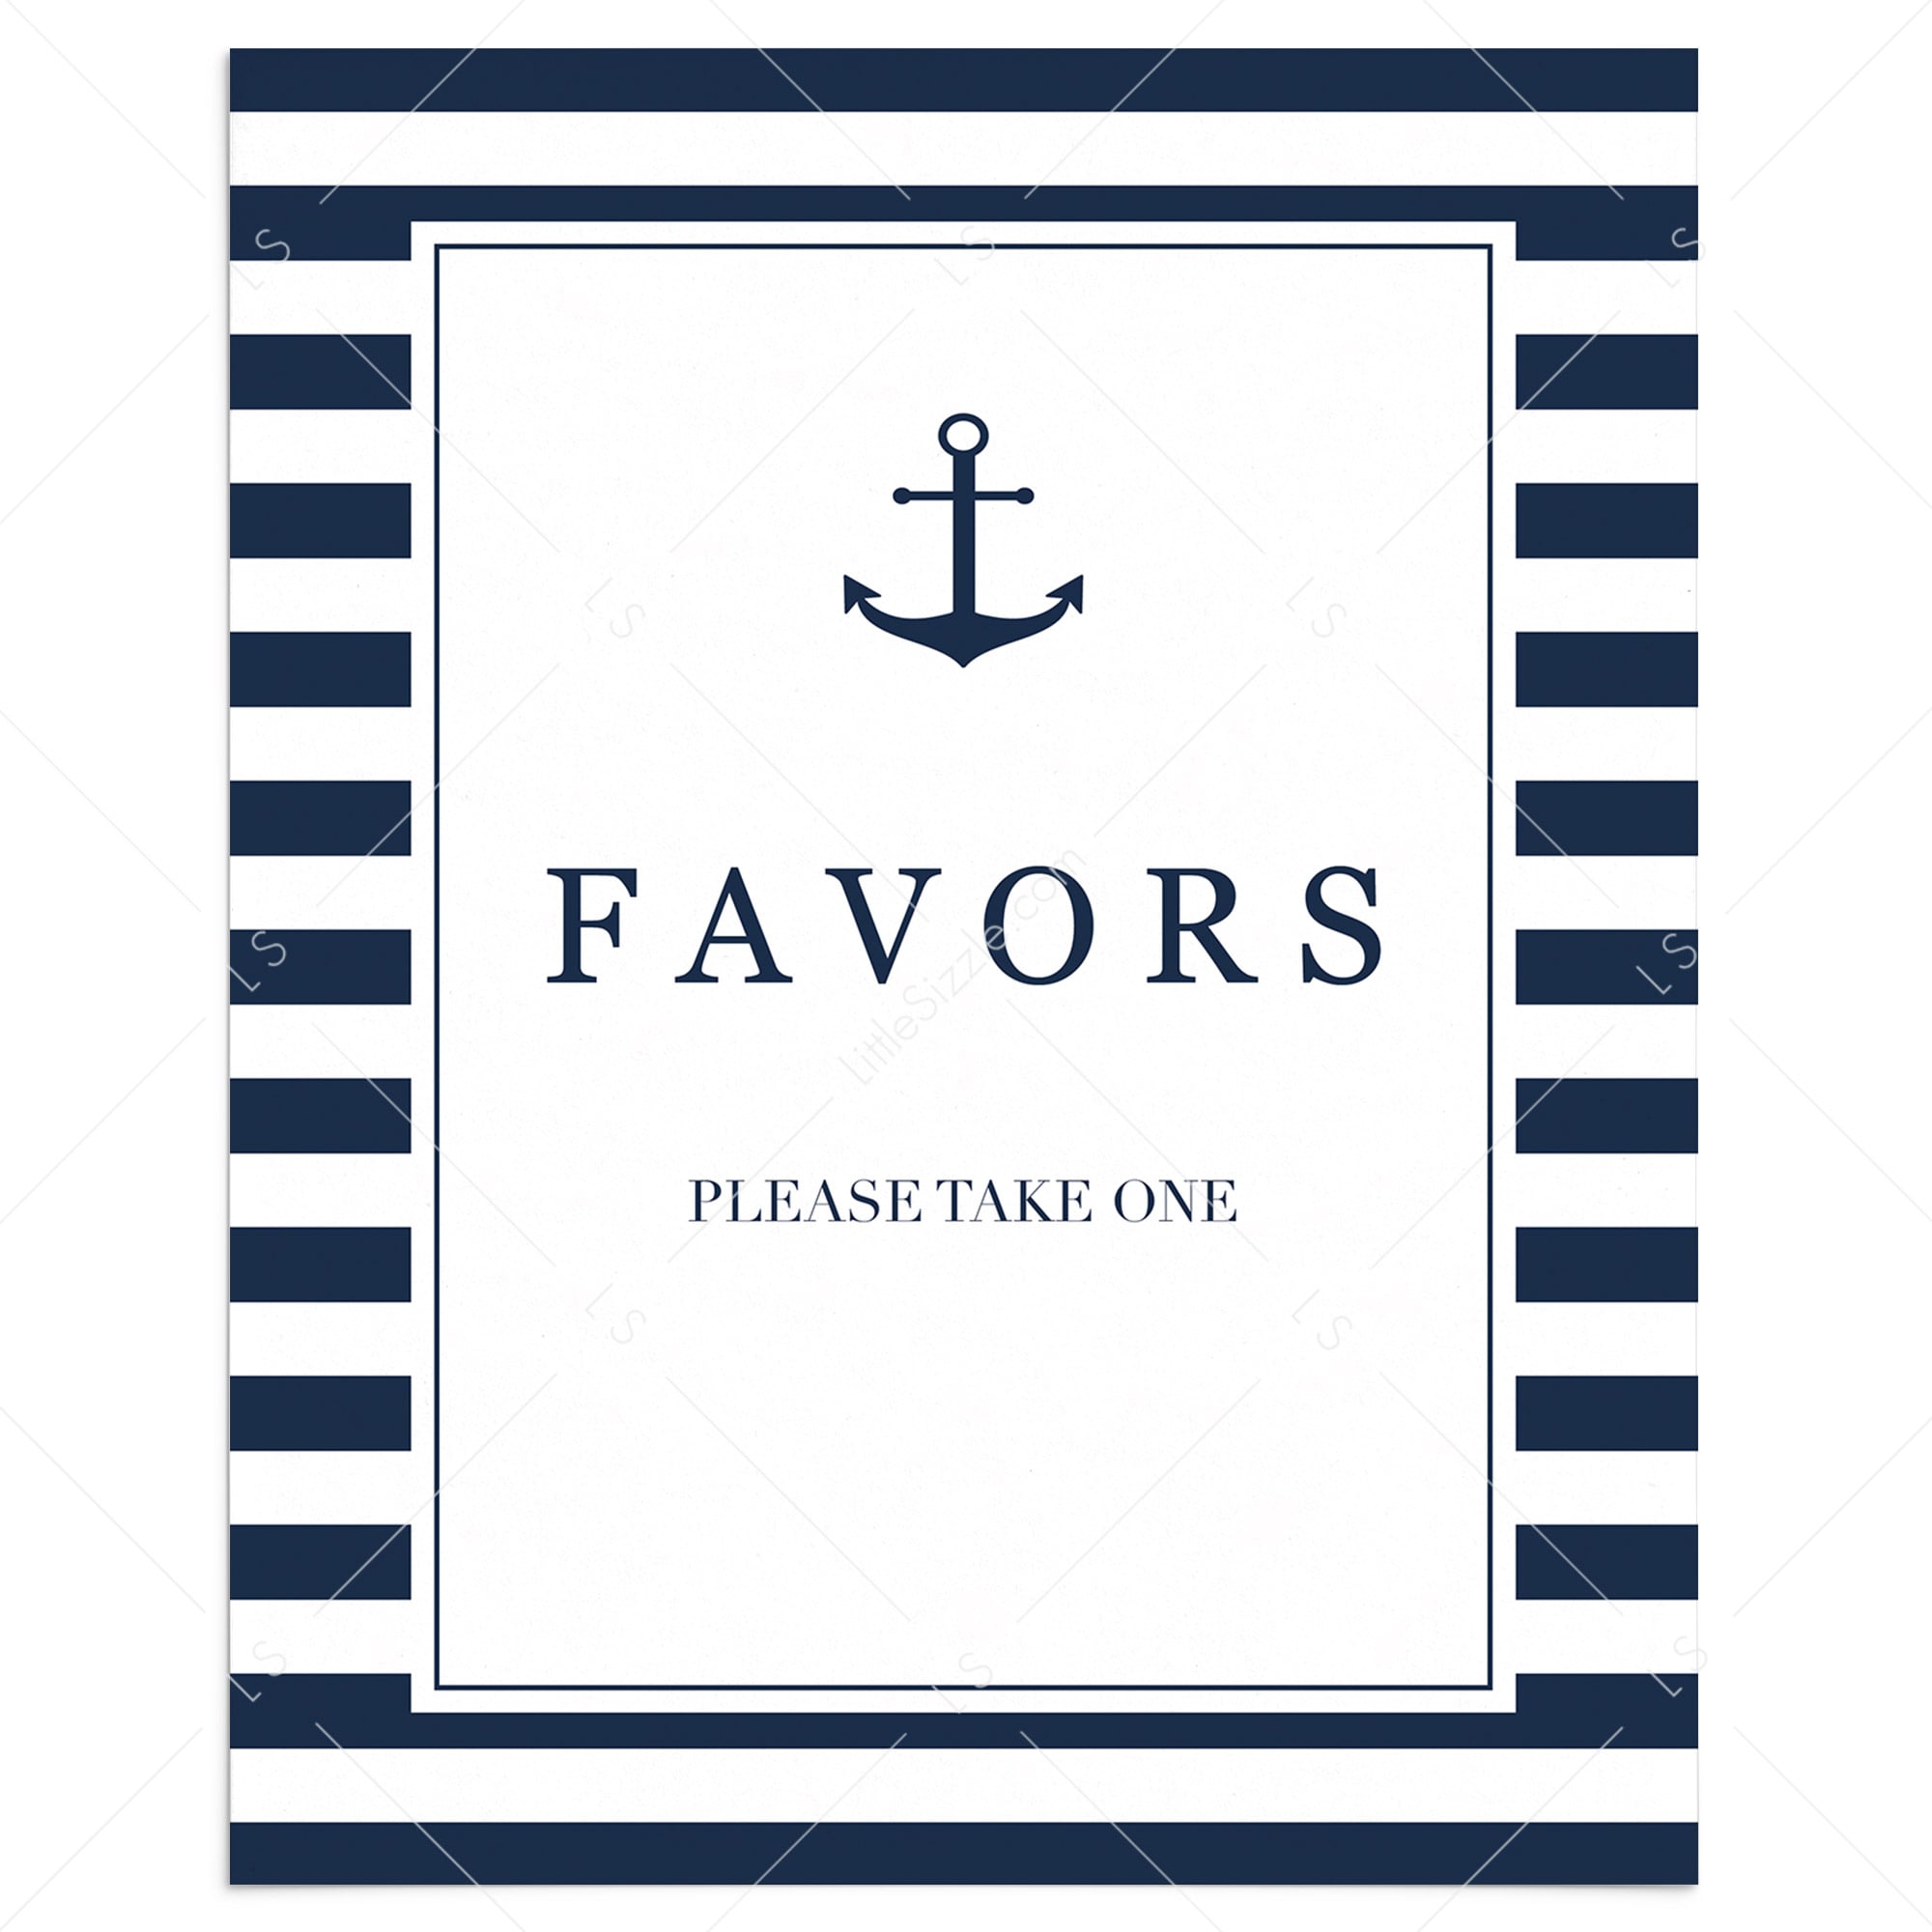 Printable favor sign for nautical party by LittleSizzle